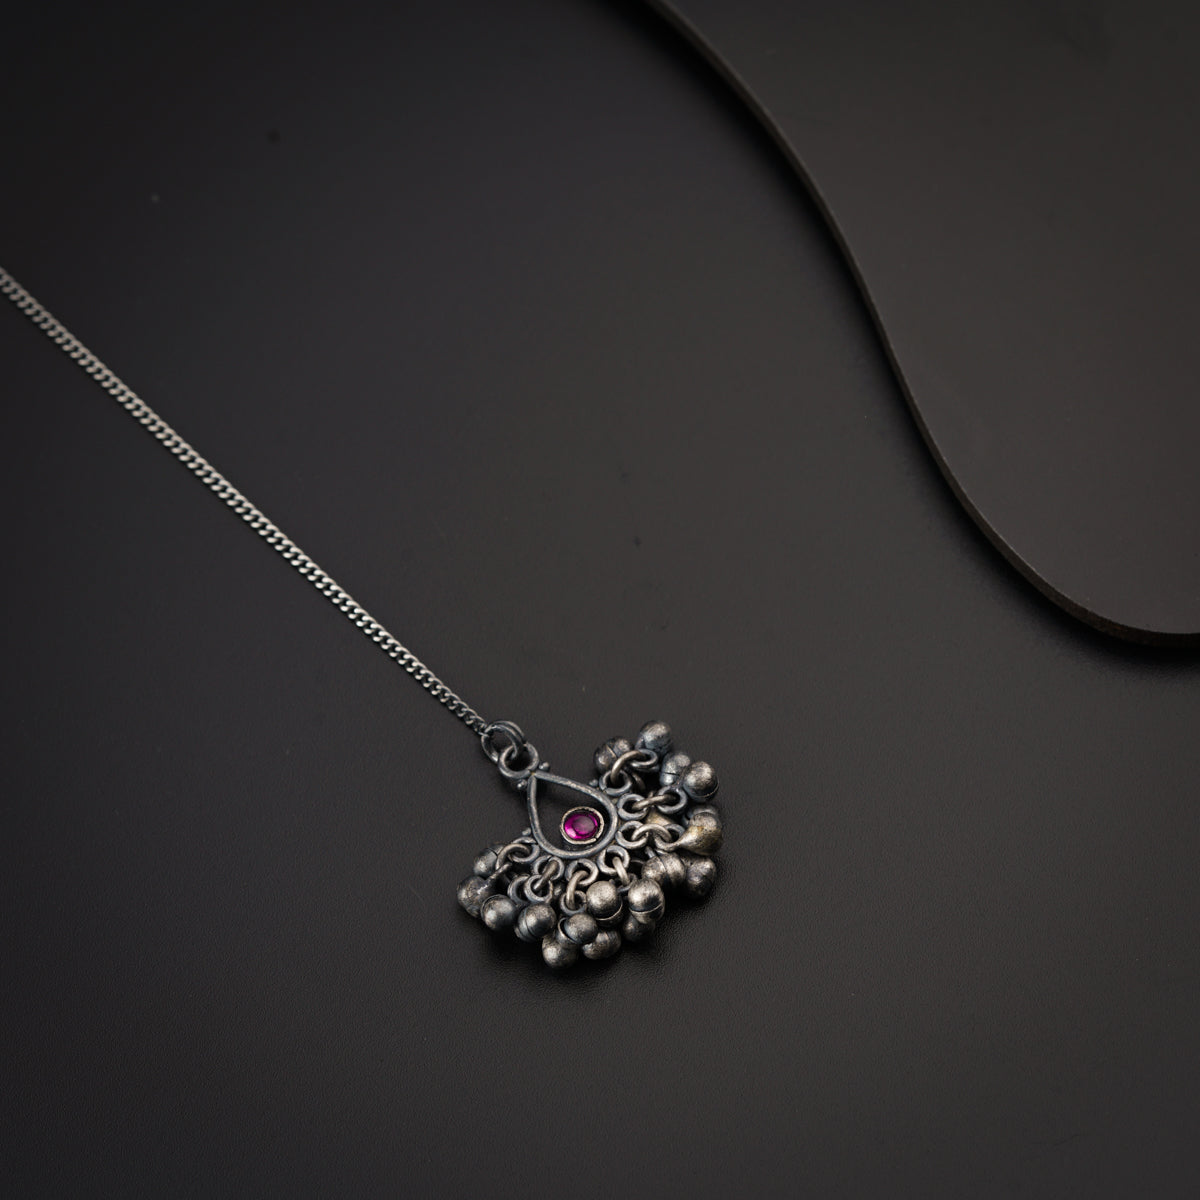 a silver necklace with a pink stone in the center